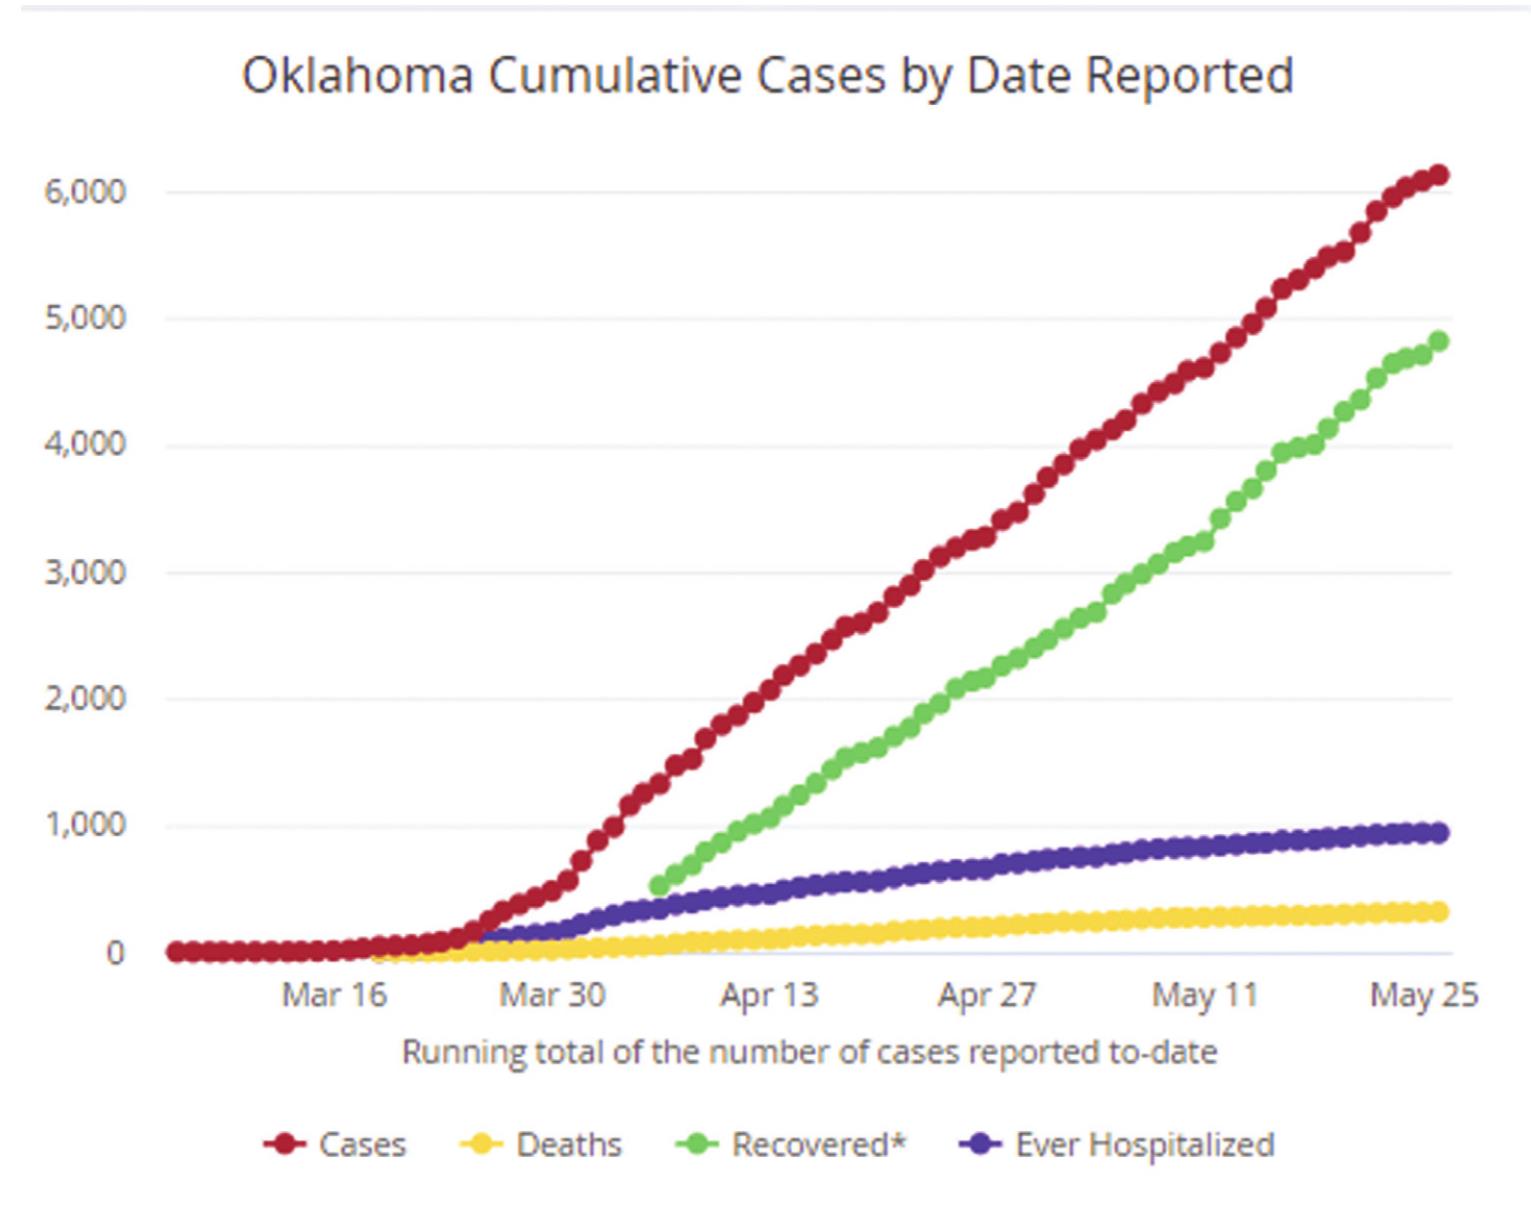 This chart shows the number of COVID-19 cases, deaths, recovered and ever hospitalized in Oklahoma. Provided